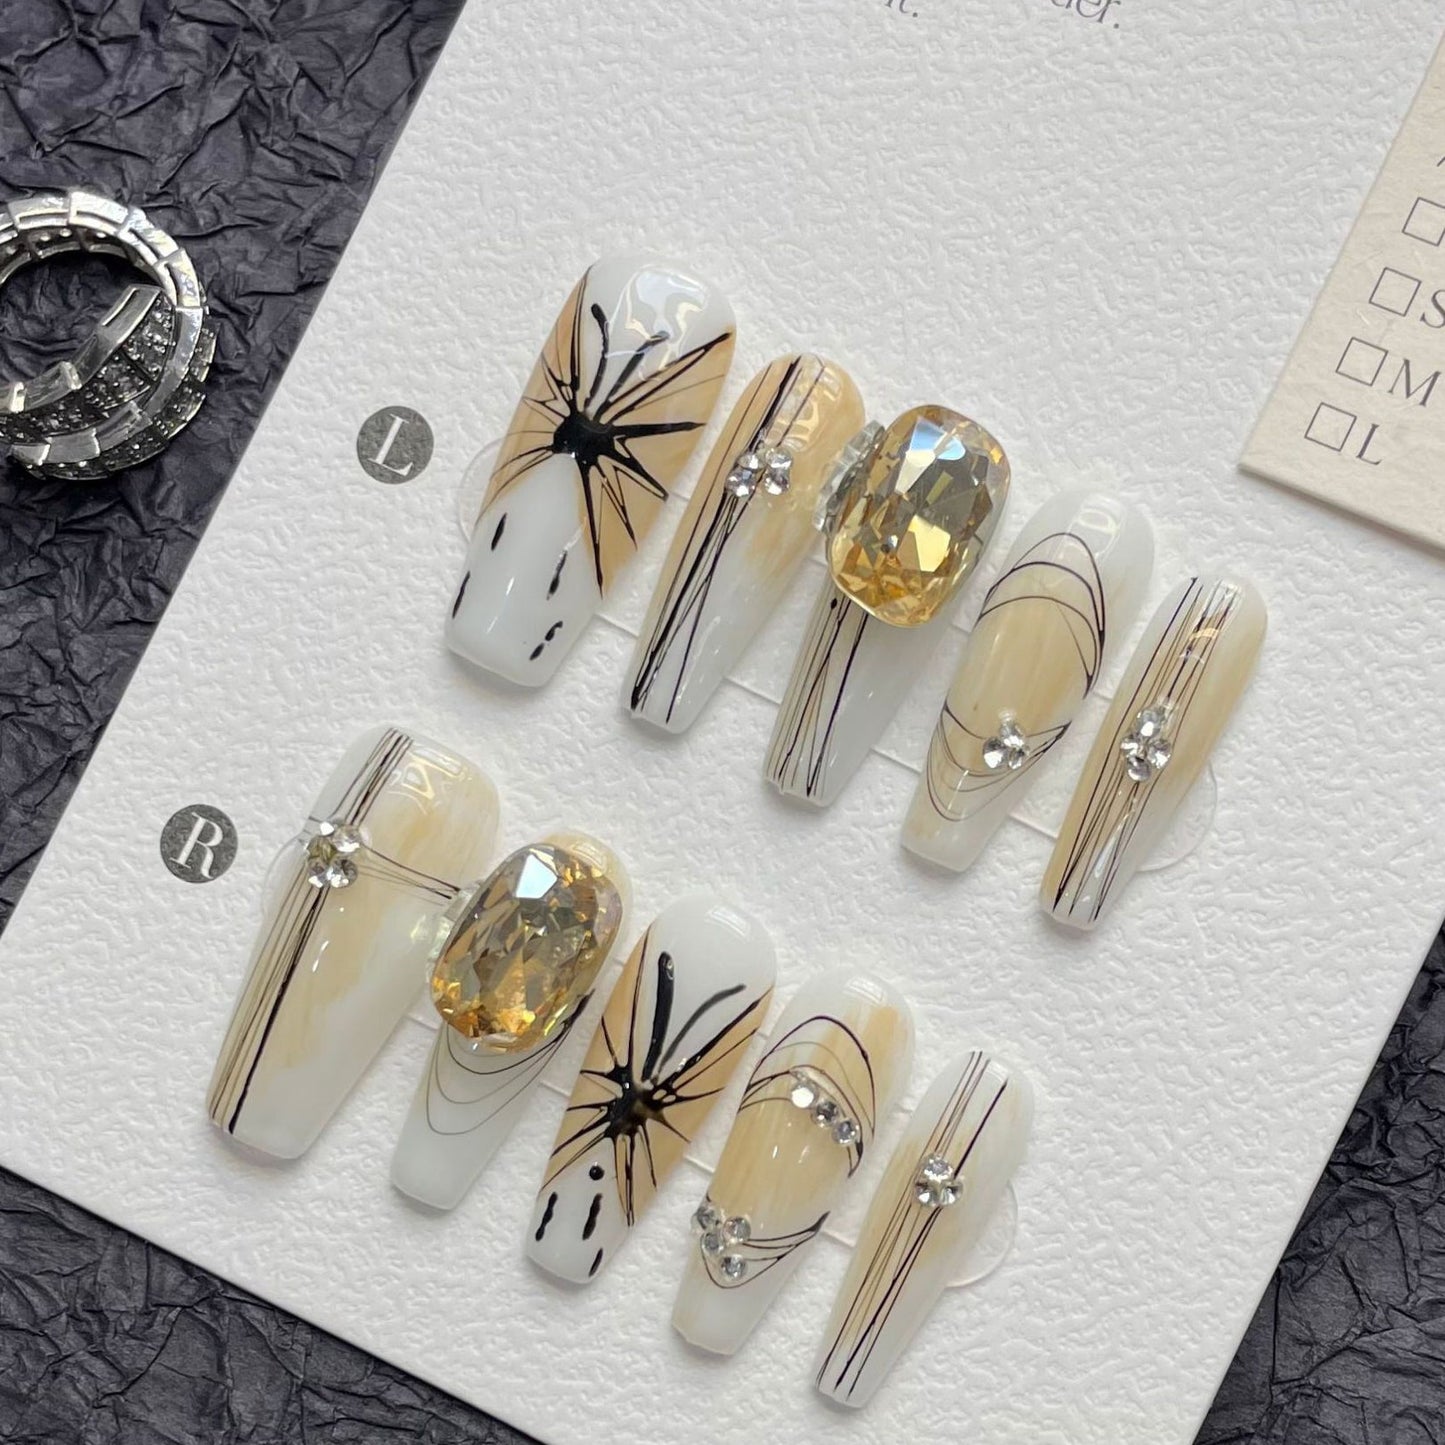 1287 Line Butterfly style press on nails 100% handmade false nails white nude color